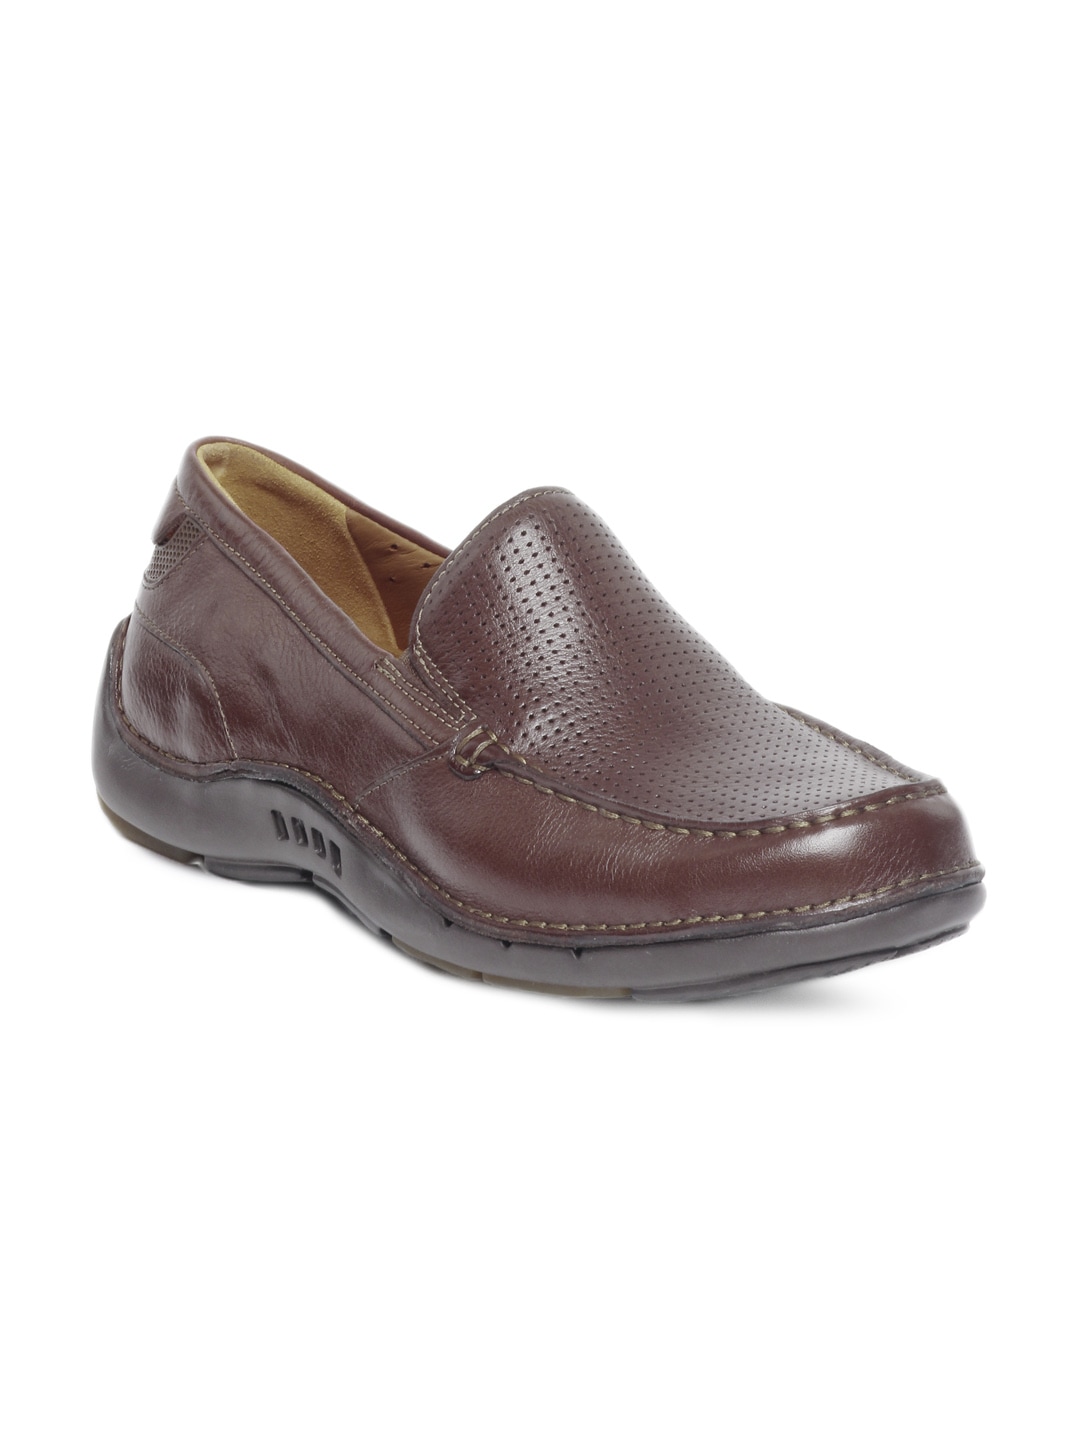 Clarks Men Brown Casual Shoes